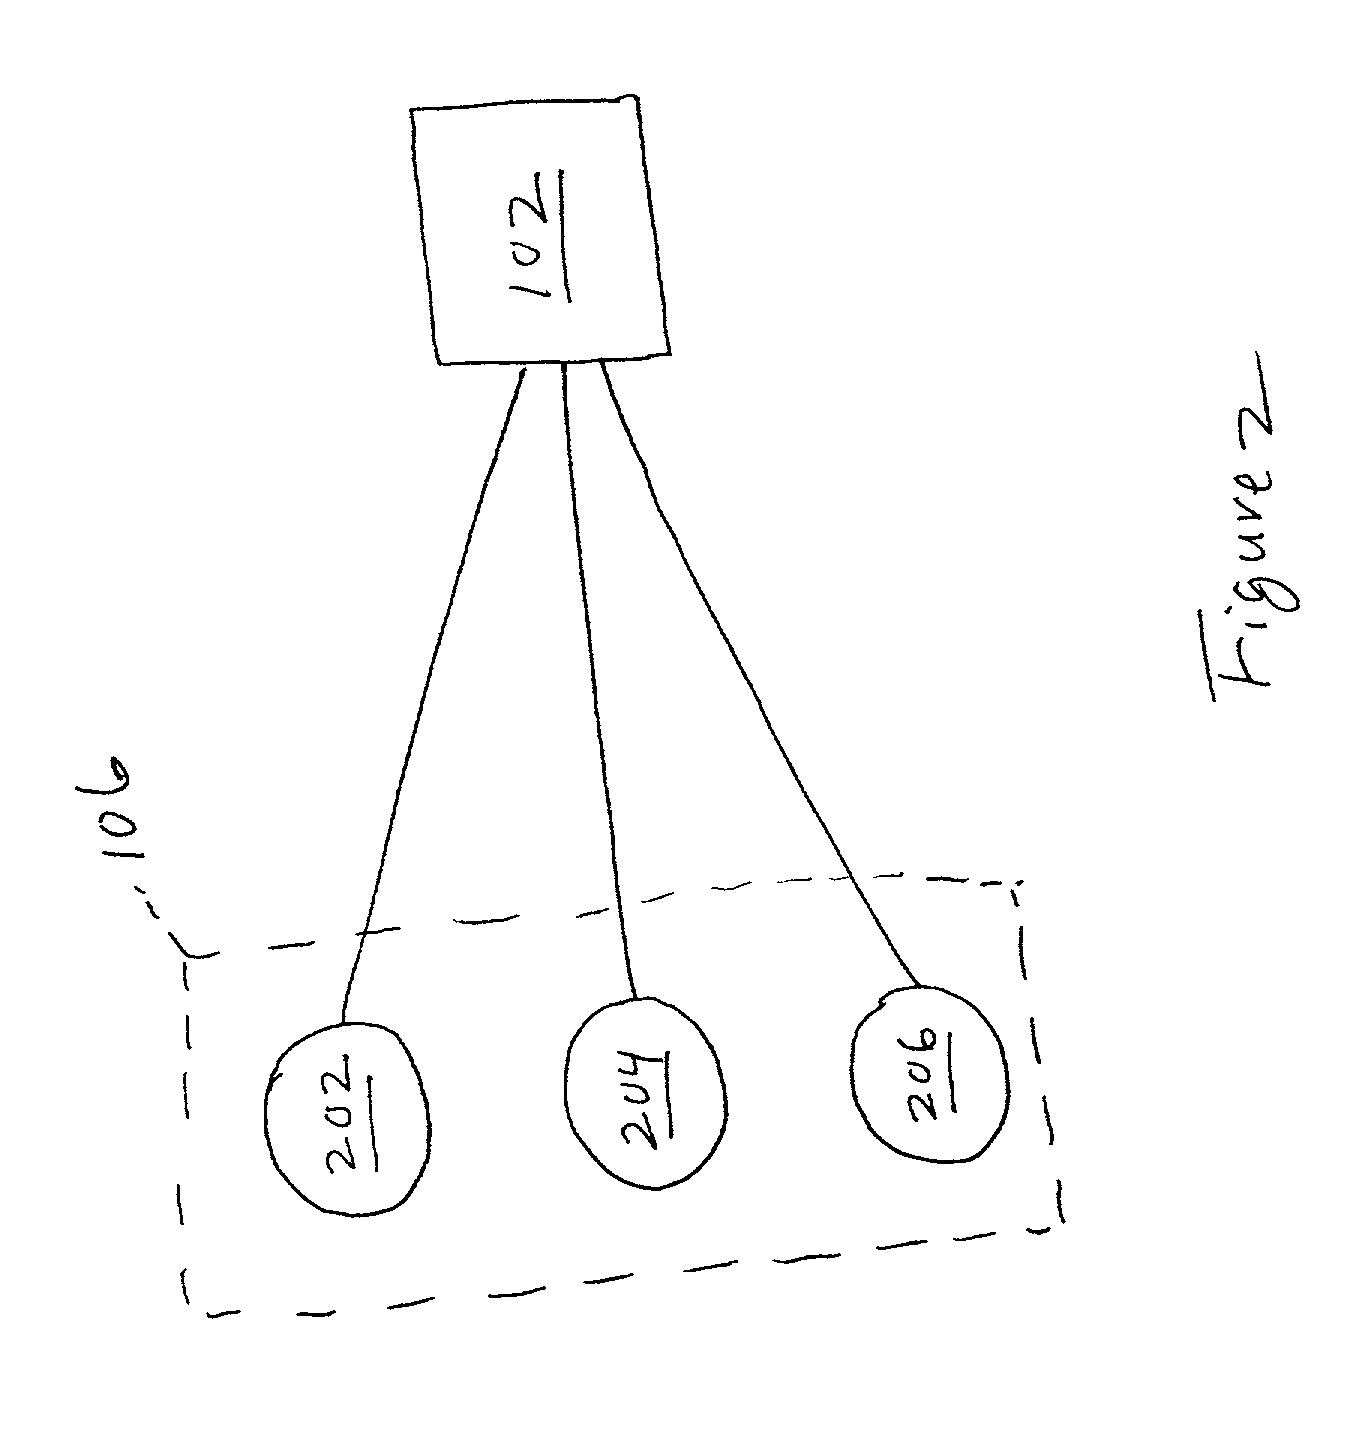 Methods and apparatus for a utility processing system